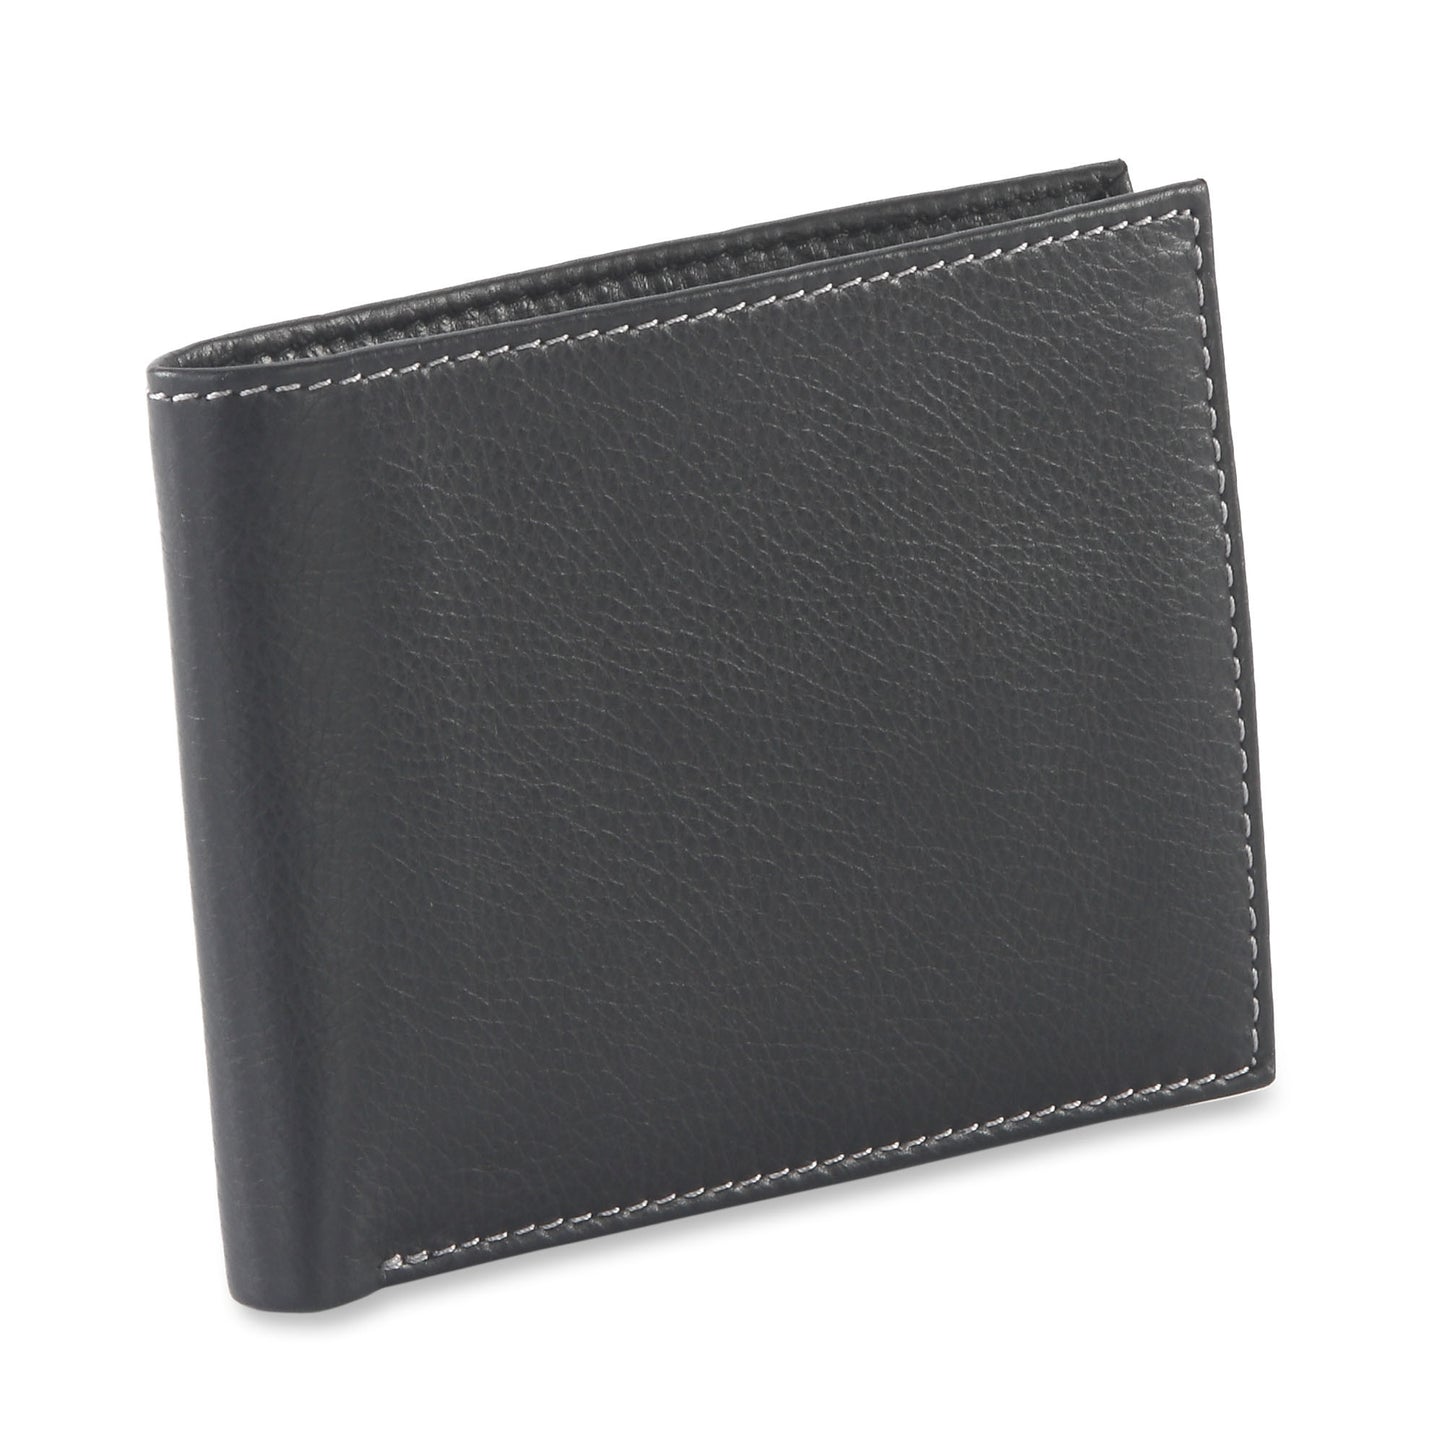 Style n Craft 200302 bifold wallet with center flap in black color leather - closed view